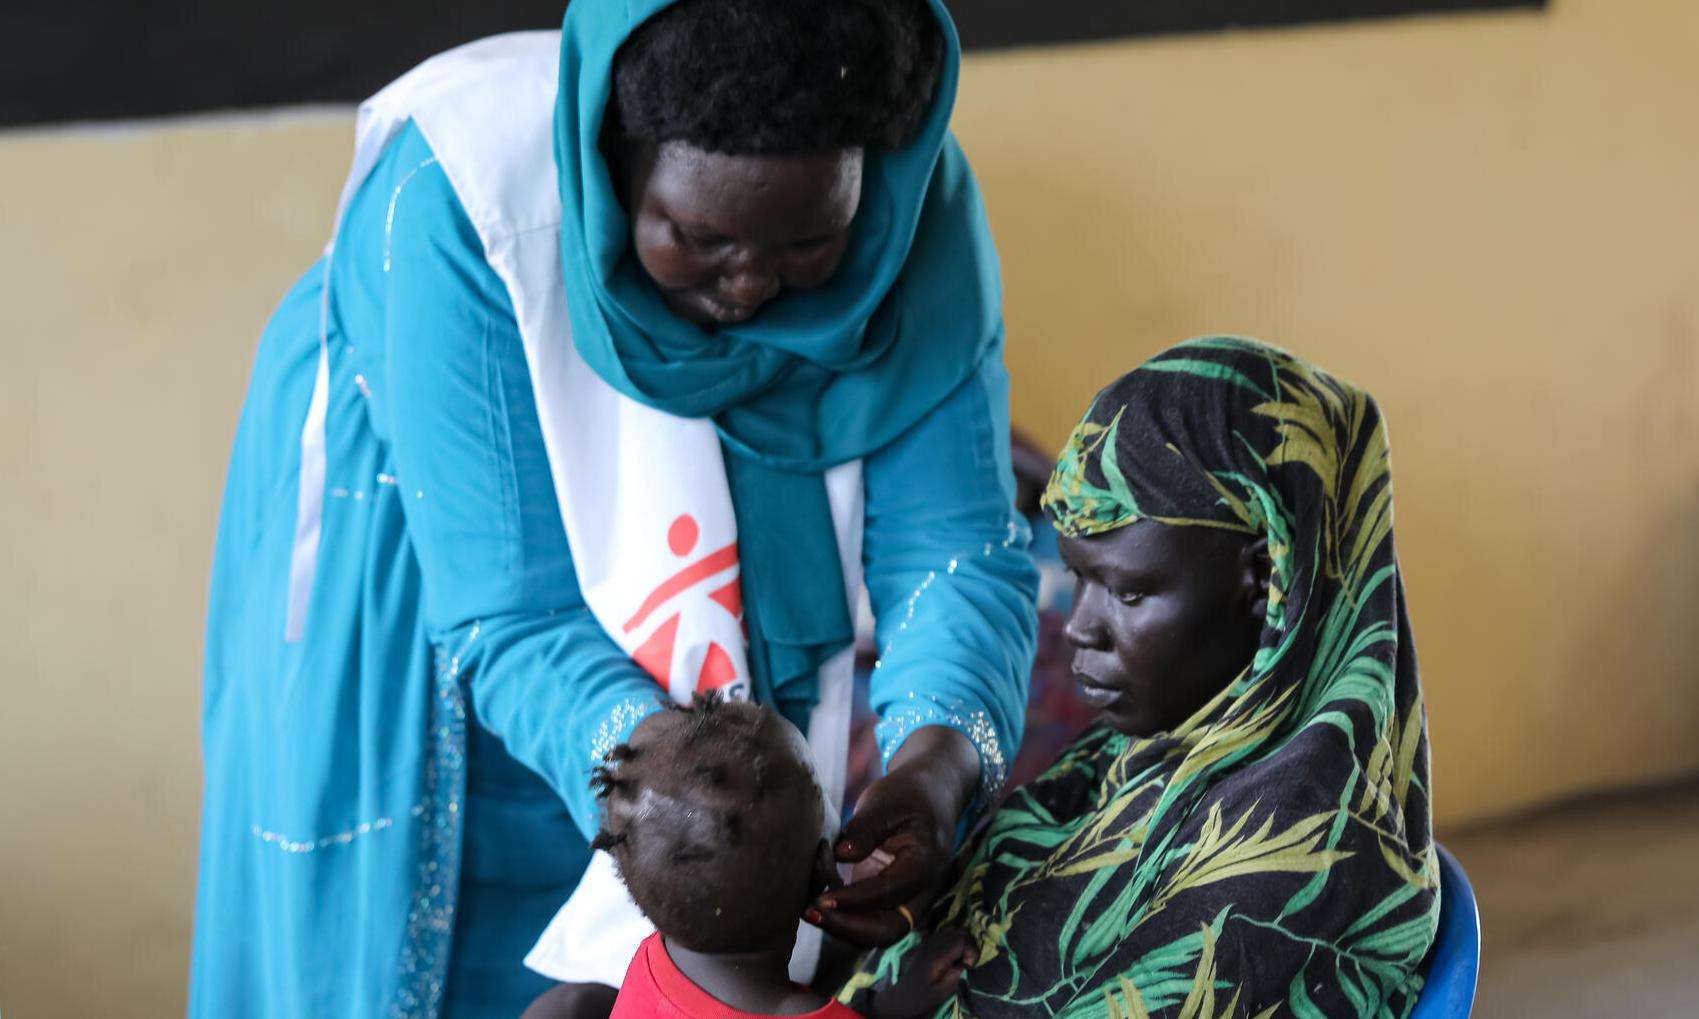 An MSF medic treats a small child at a mobile clinic in Renk, Upper Nile state.